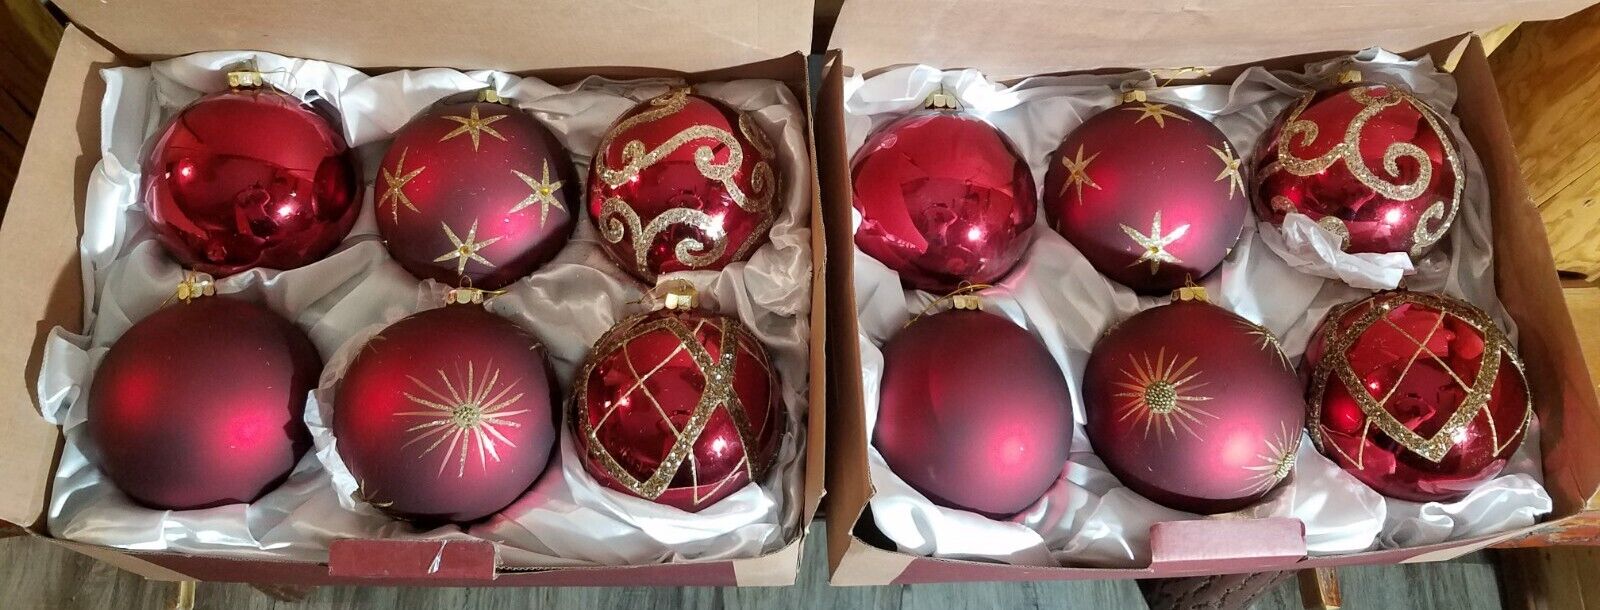 Balsam Hill Large Jumbo Brilliant Bordeaux Round Red & Gold Ornament Set Of 12